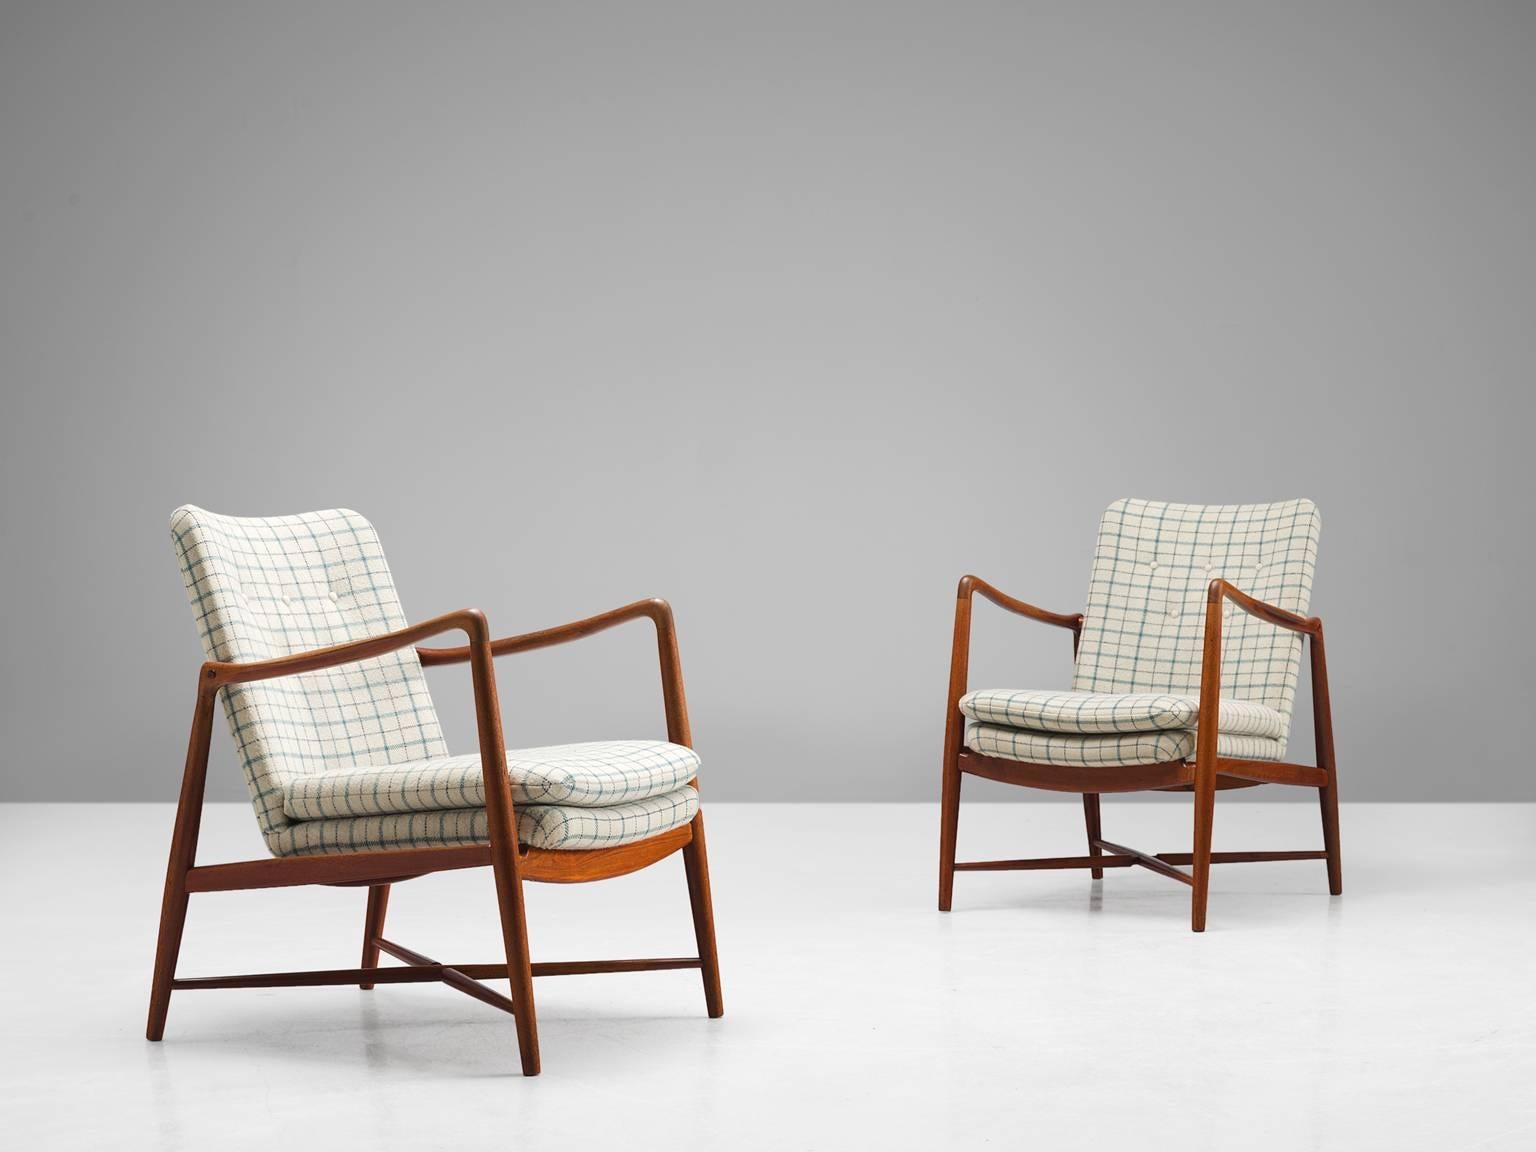 Finn Juhl for Bovirke, armchairs model 'BO-59', teak and white, black and blue checked fabric, Denmark, design 1954, production 1950s.

These armchairs are designed by Finn Juhl and produced by Bovirke. The chairs show the aesthetic